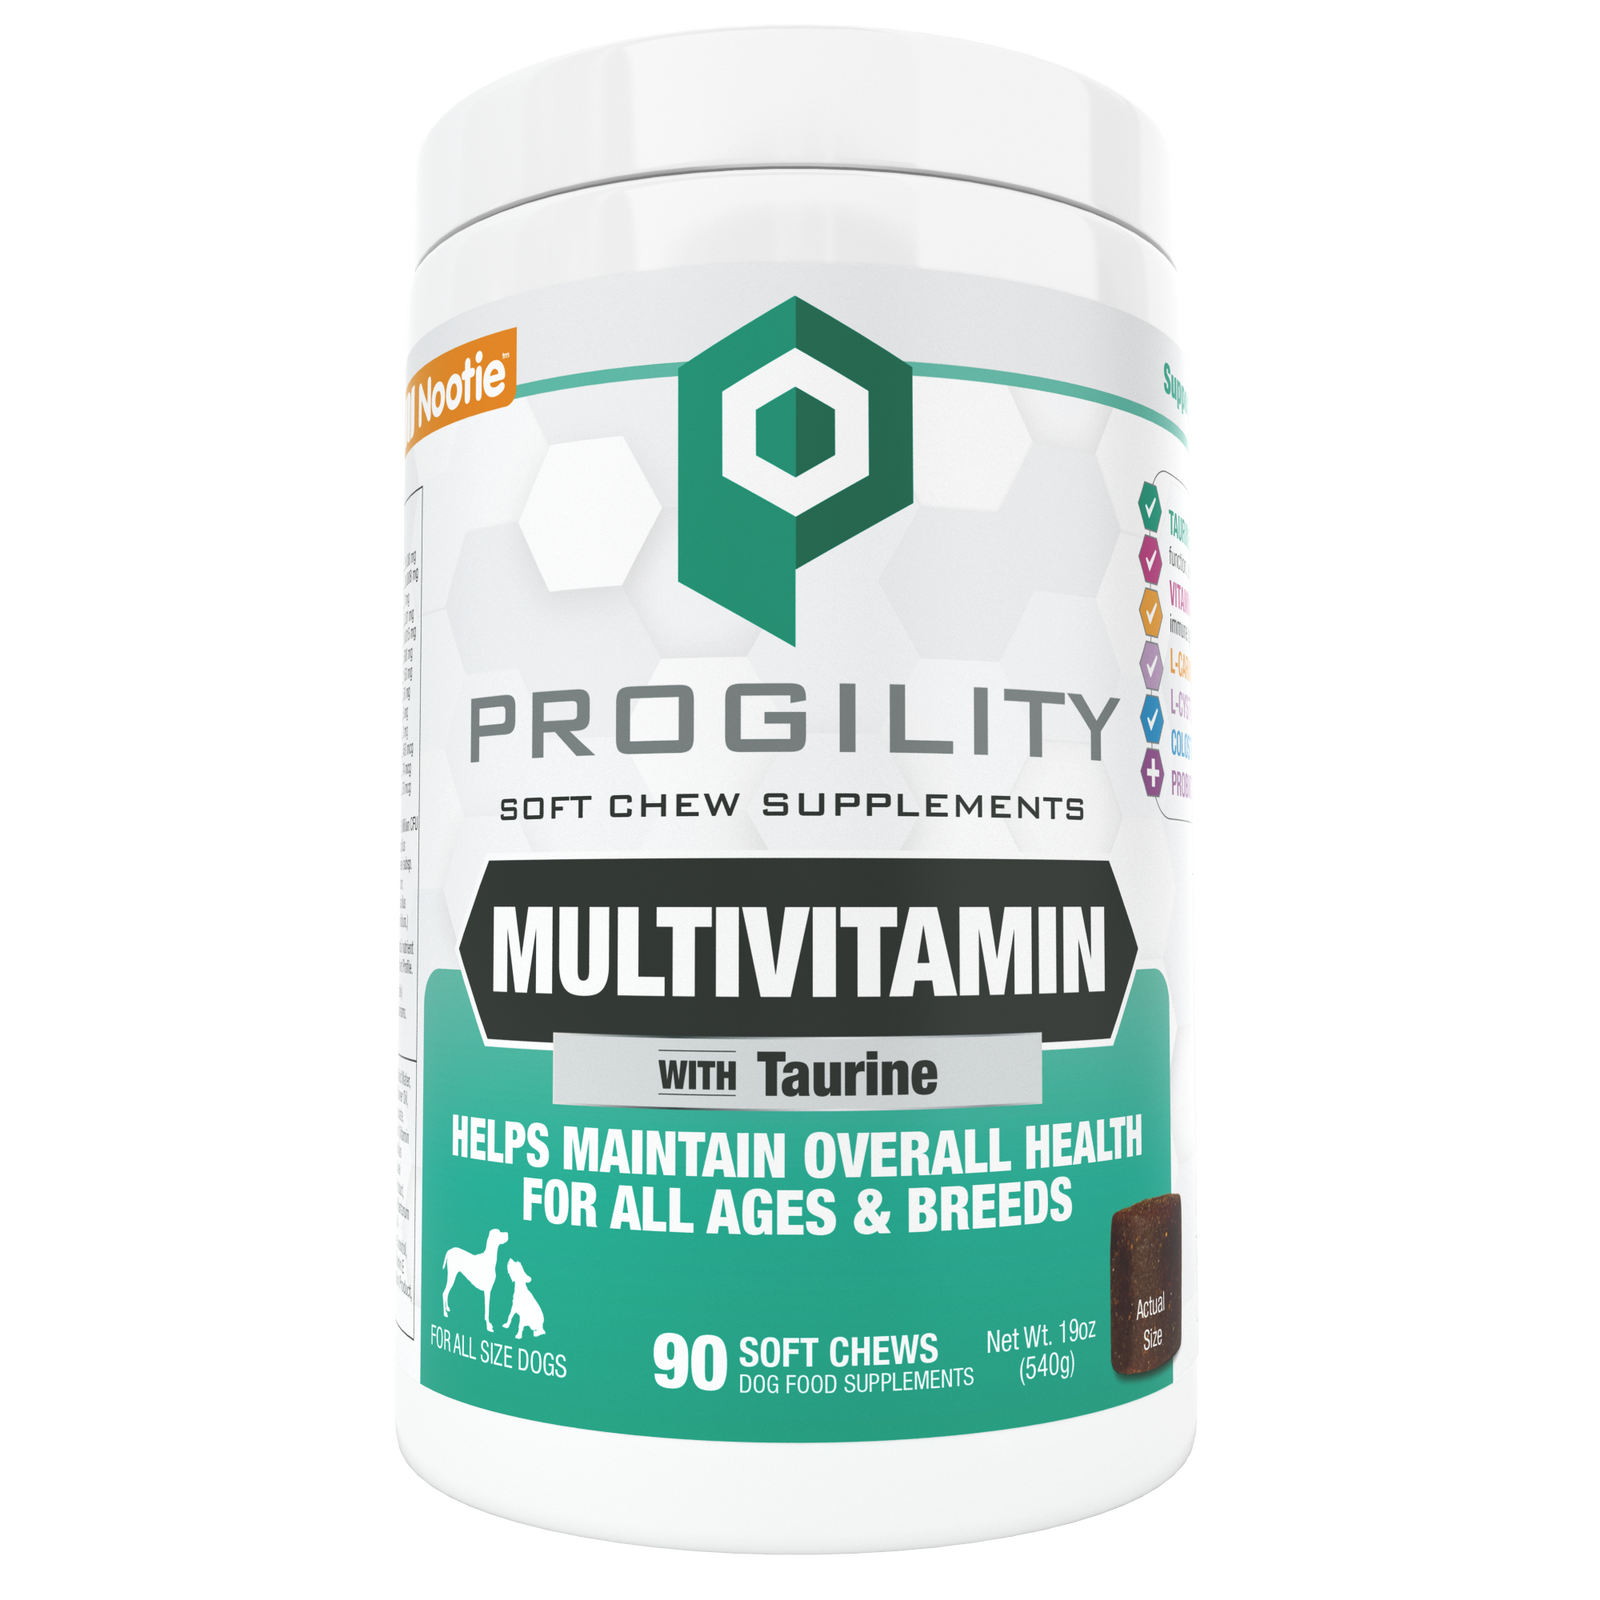 Progility Multivitamin Soft Chew Supplement for Dogs | Helps Maintain Overall Health for All Ages & Breeds